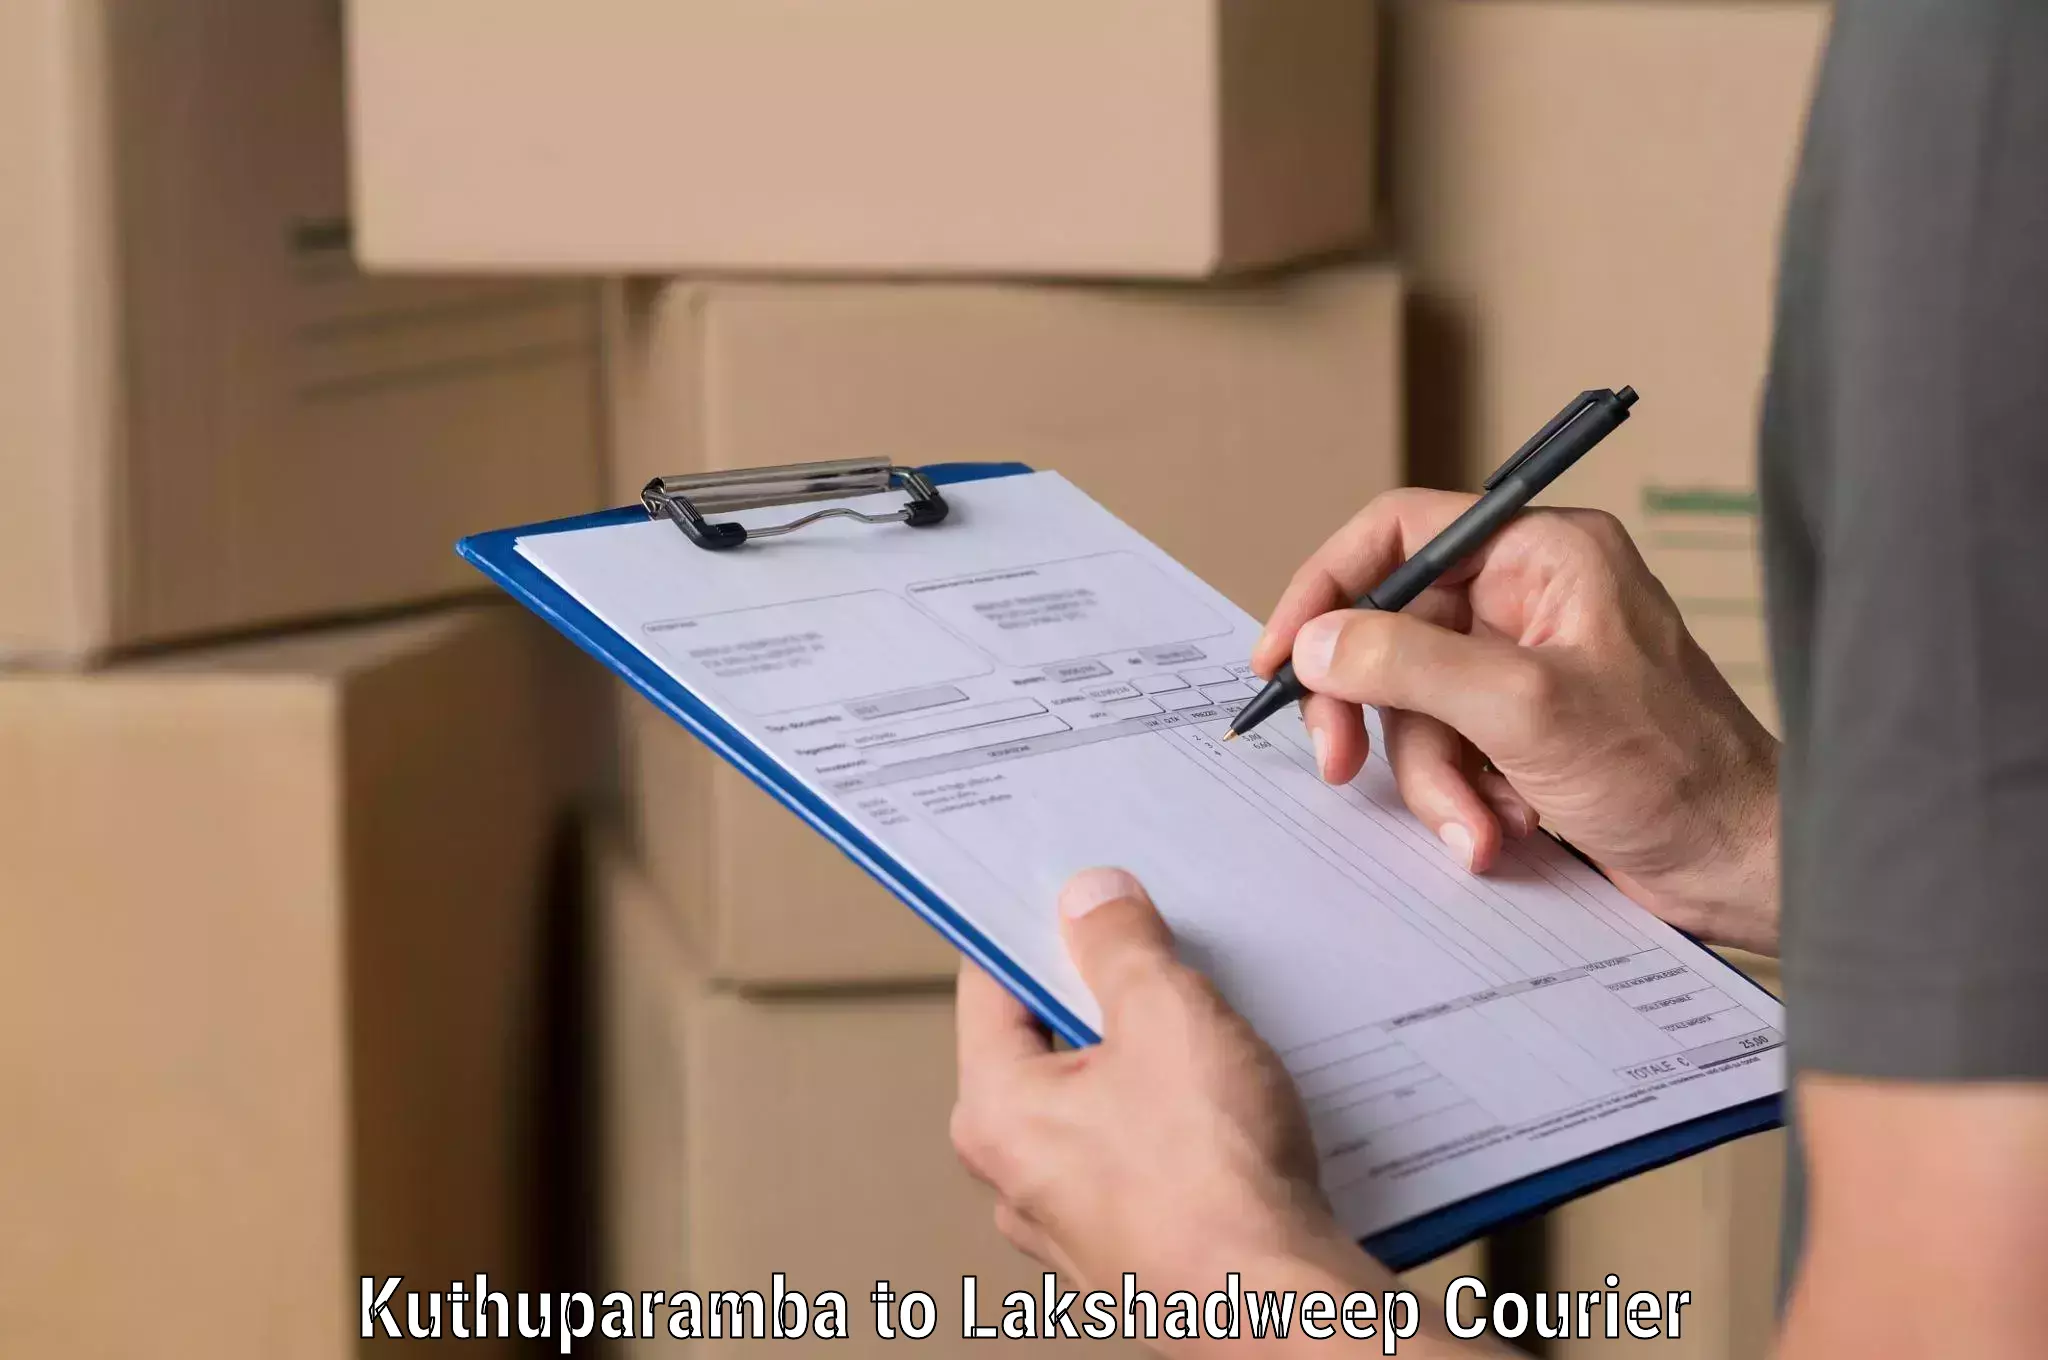 Courier service comparison in Kuthuparamba to Lakshadweep